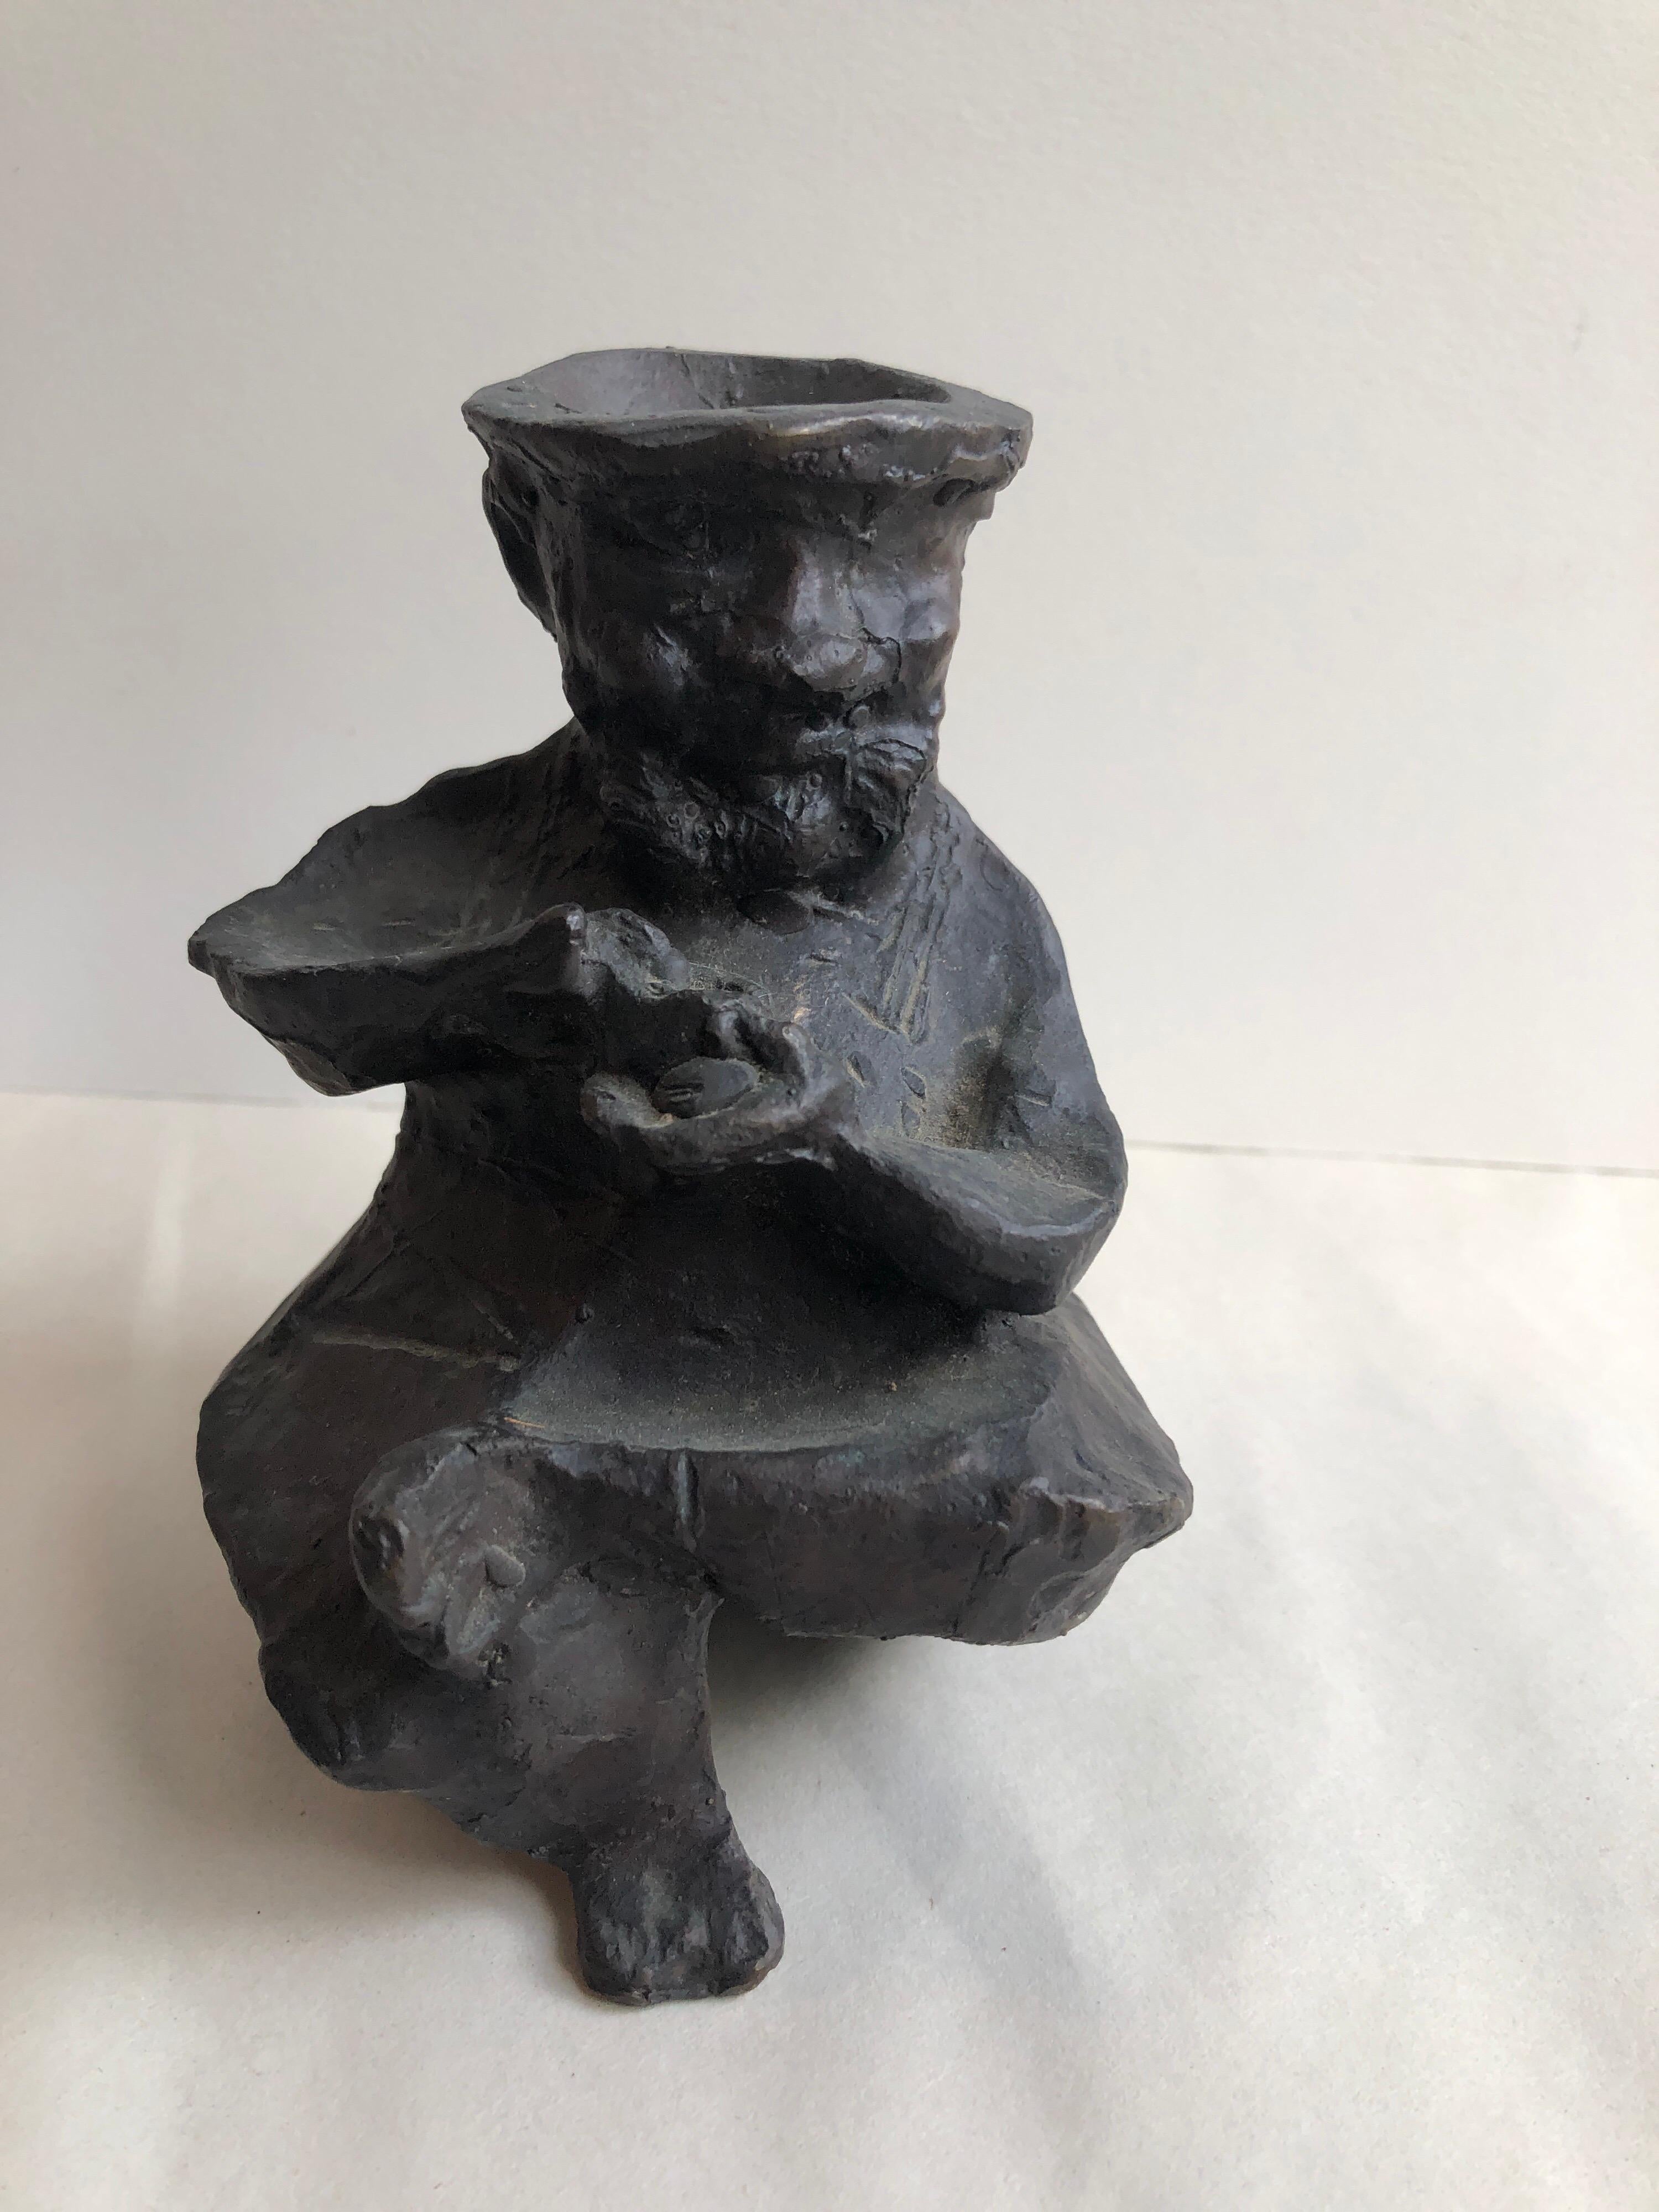 Bronze of Middle Eastern coffee drinker. Signed and numbered from edition of 100 (I don't know how many were actually cast) 

Nachum Gutman alternate spelling: Nahum Gutman; Hebrew: נחום גוטמן‎, 1898 – 1980, was an Israeli painter, sculptor, and